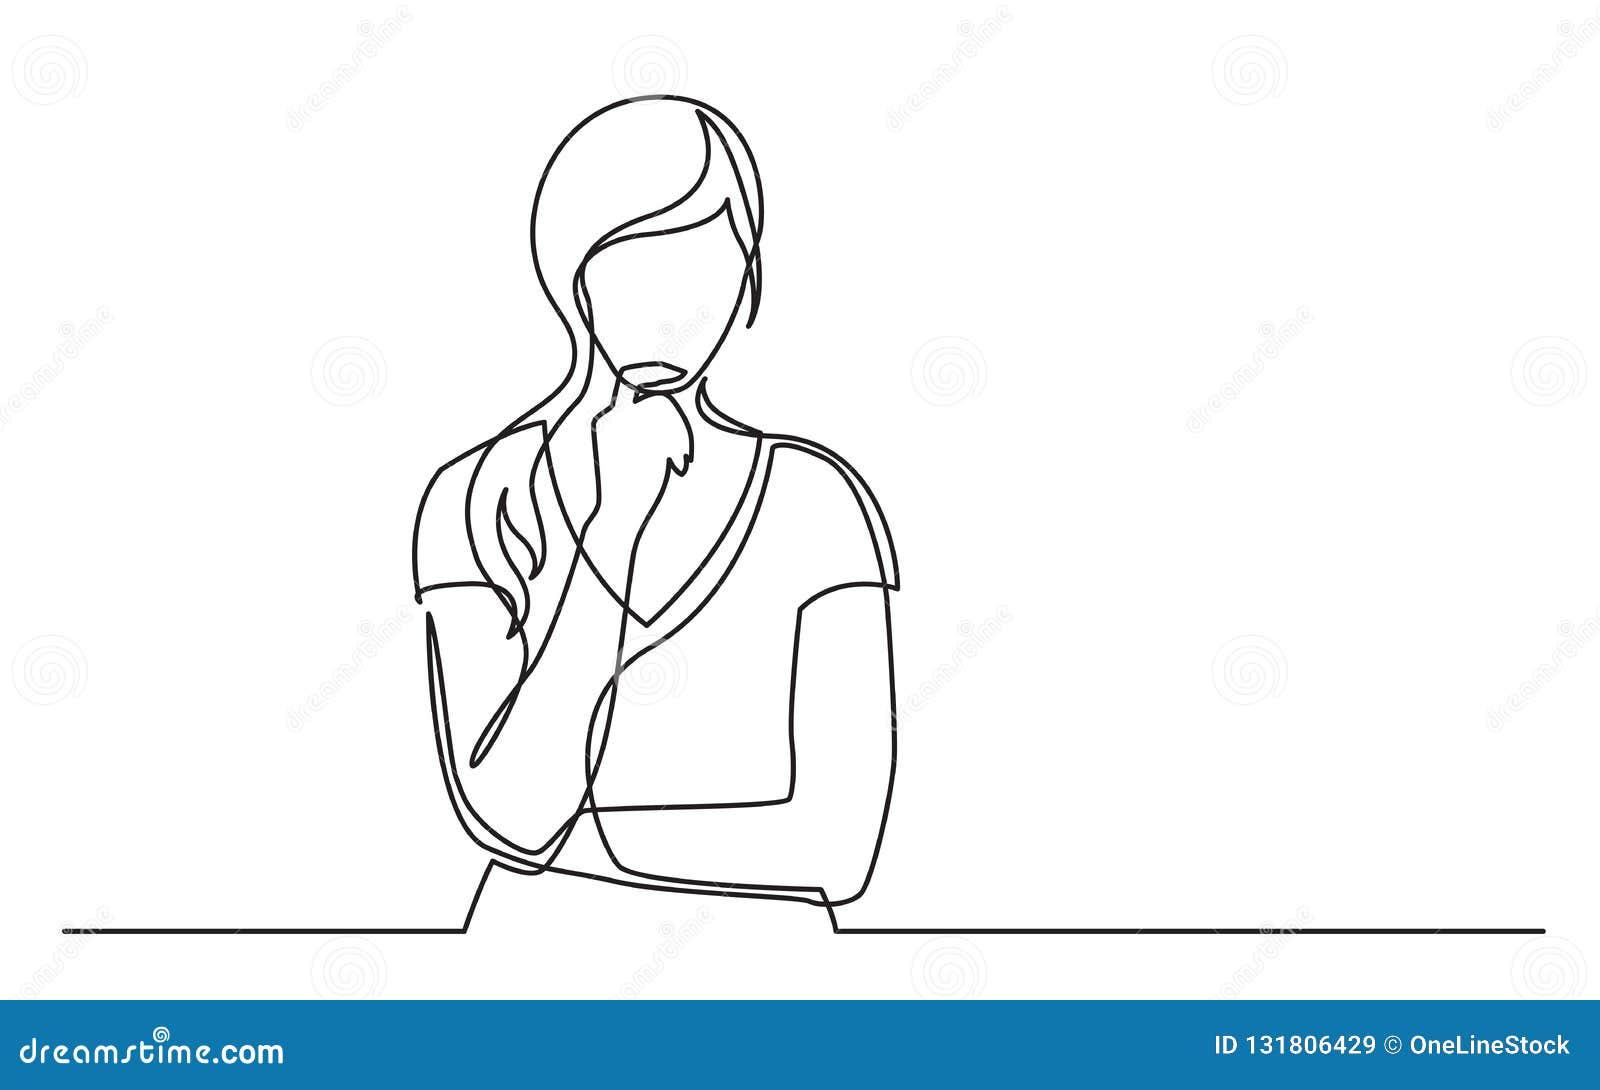 Continuous Line Drawing Of Woman Confused Thinking Stock Vector